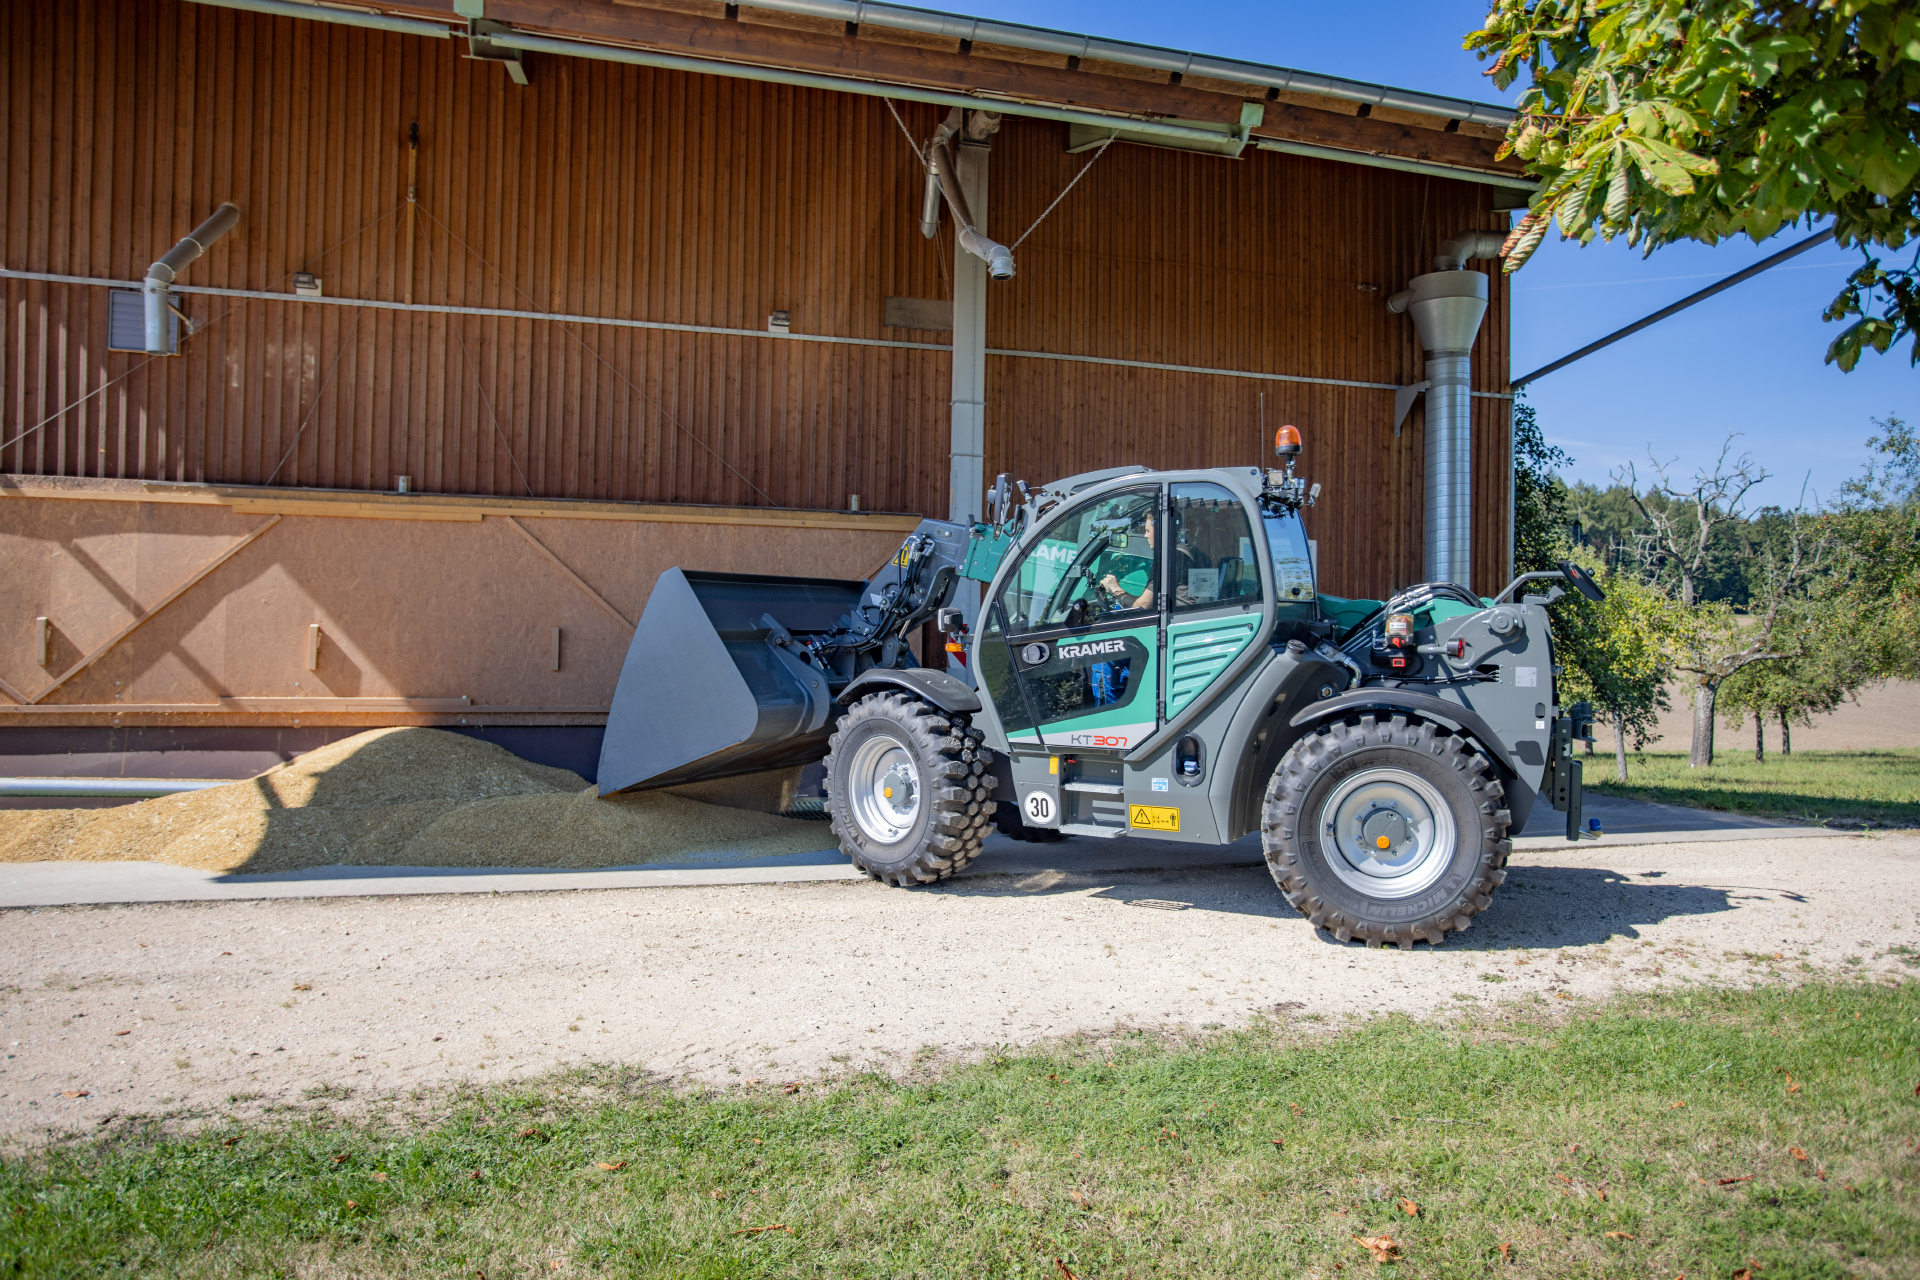 The Kramer telehandler KT307 while working with corn.